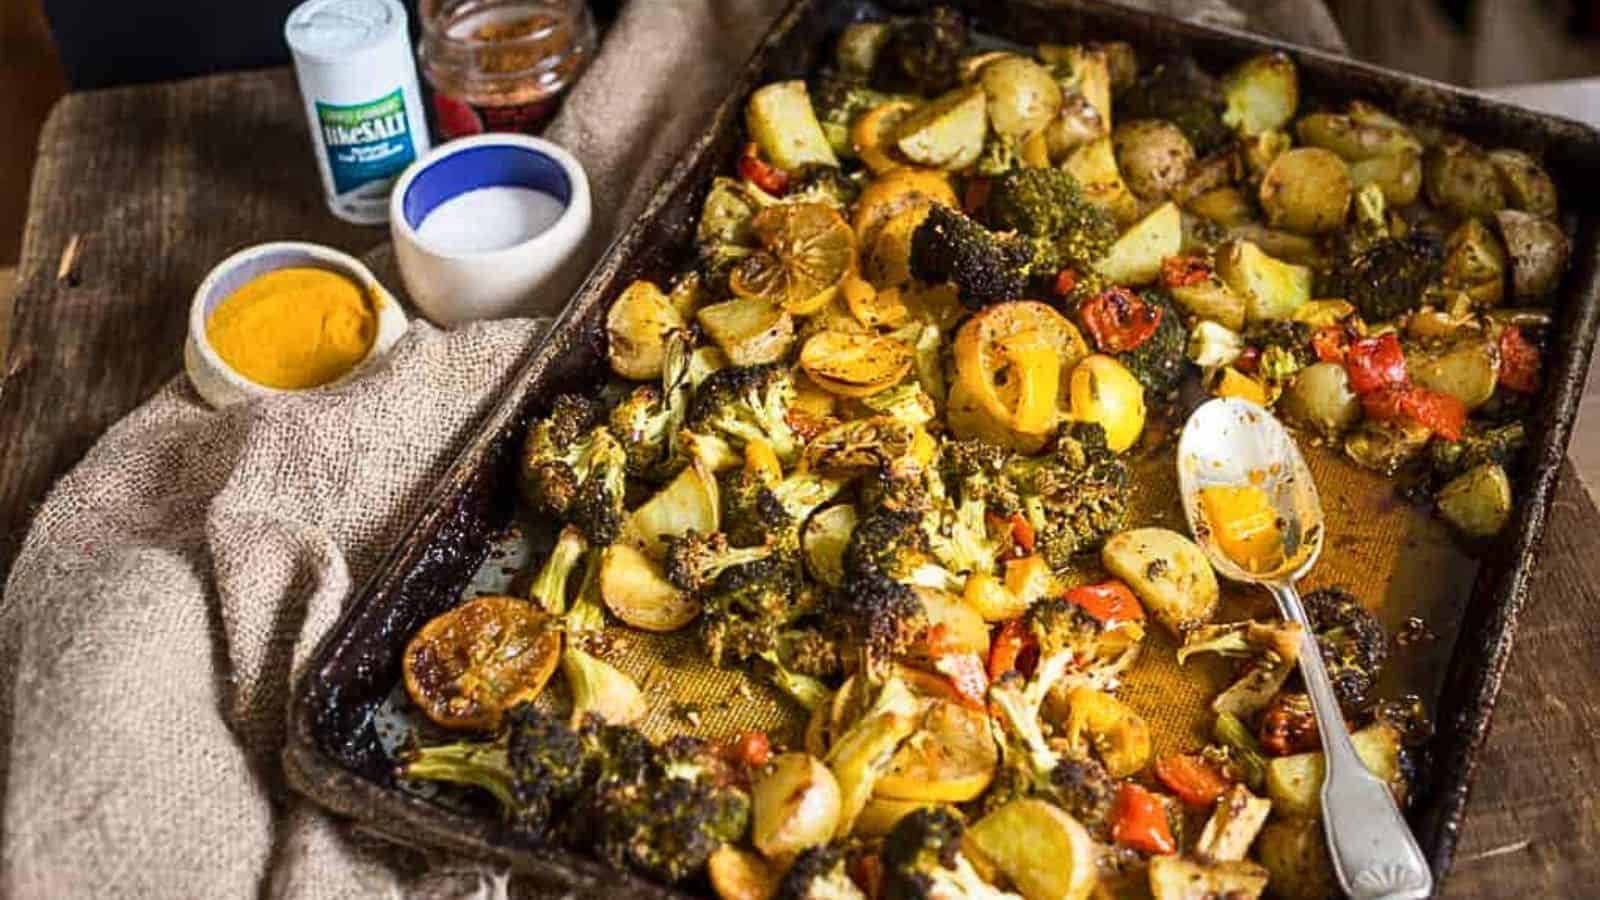 Roasted broccoli, lemon potatoes, and bell peppers in a sheet pan.